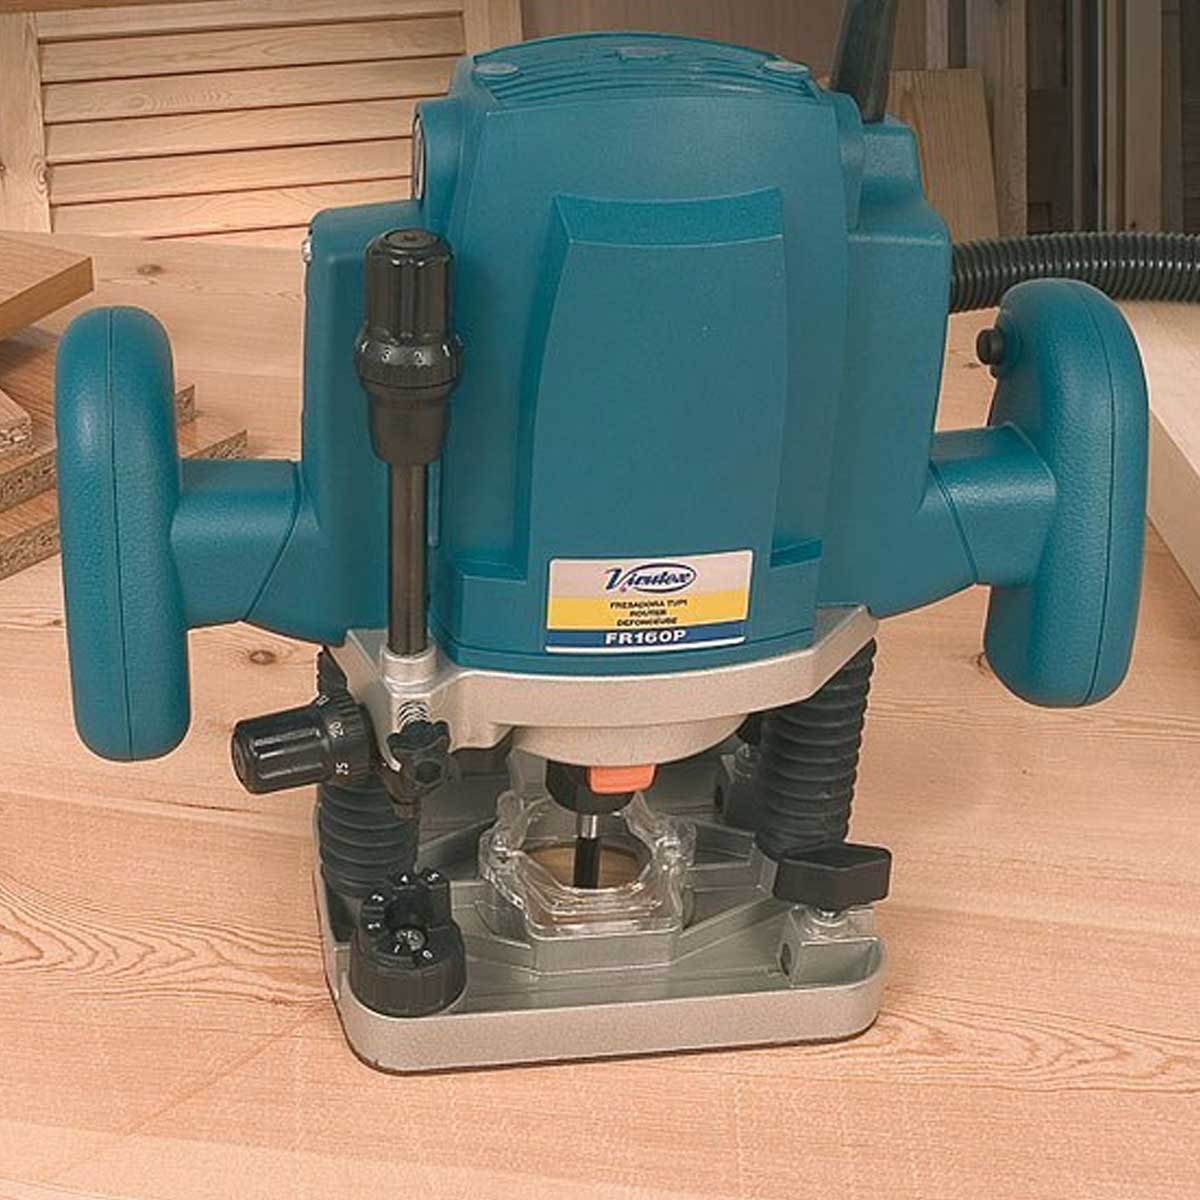 European Hand Router Manufacturers, Suppliers in Lucknow